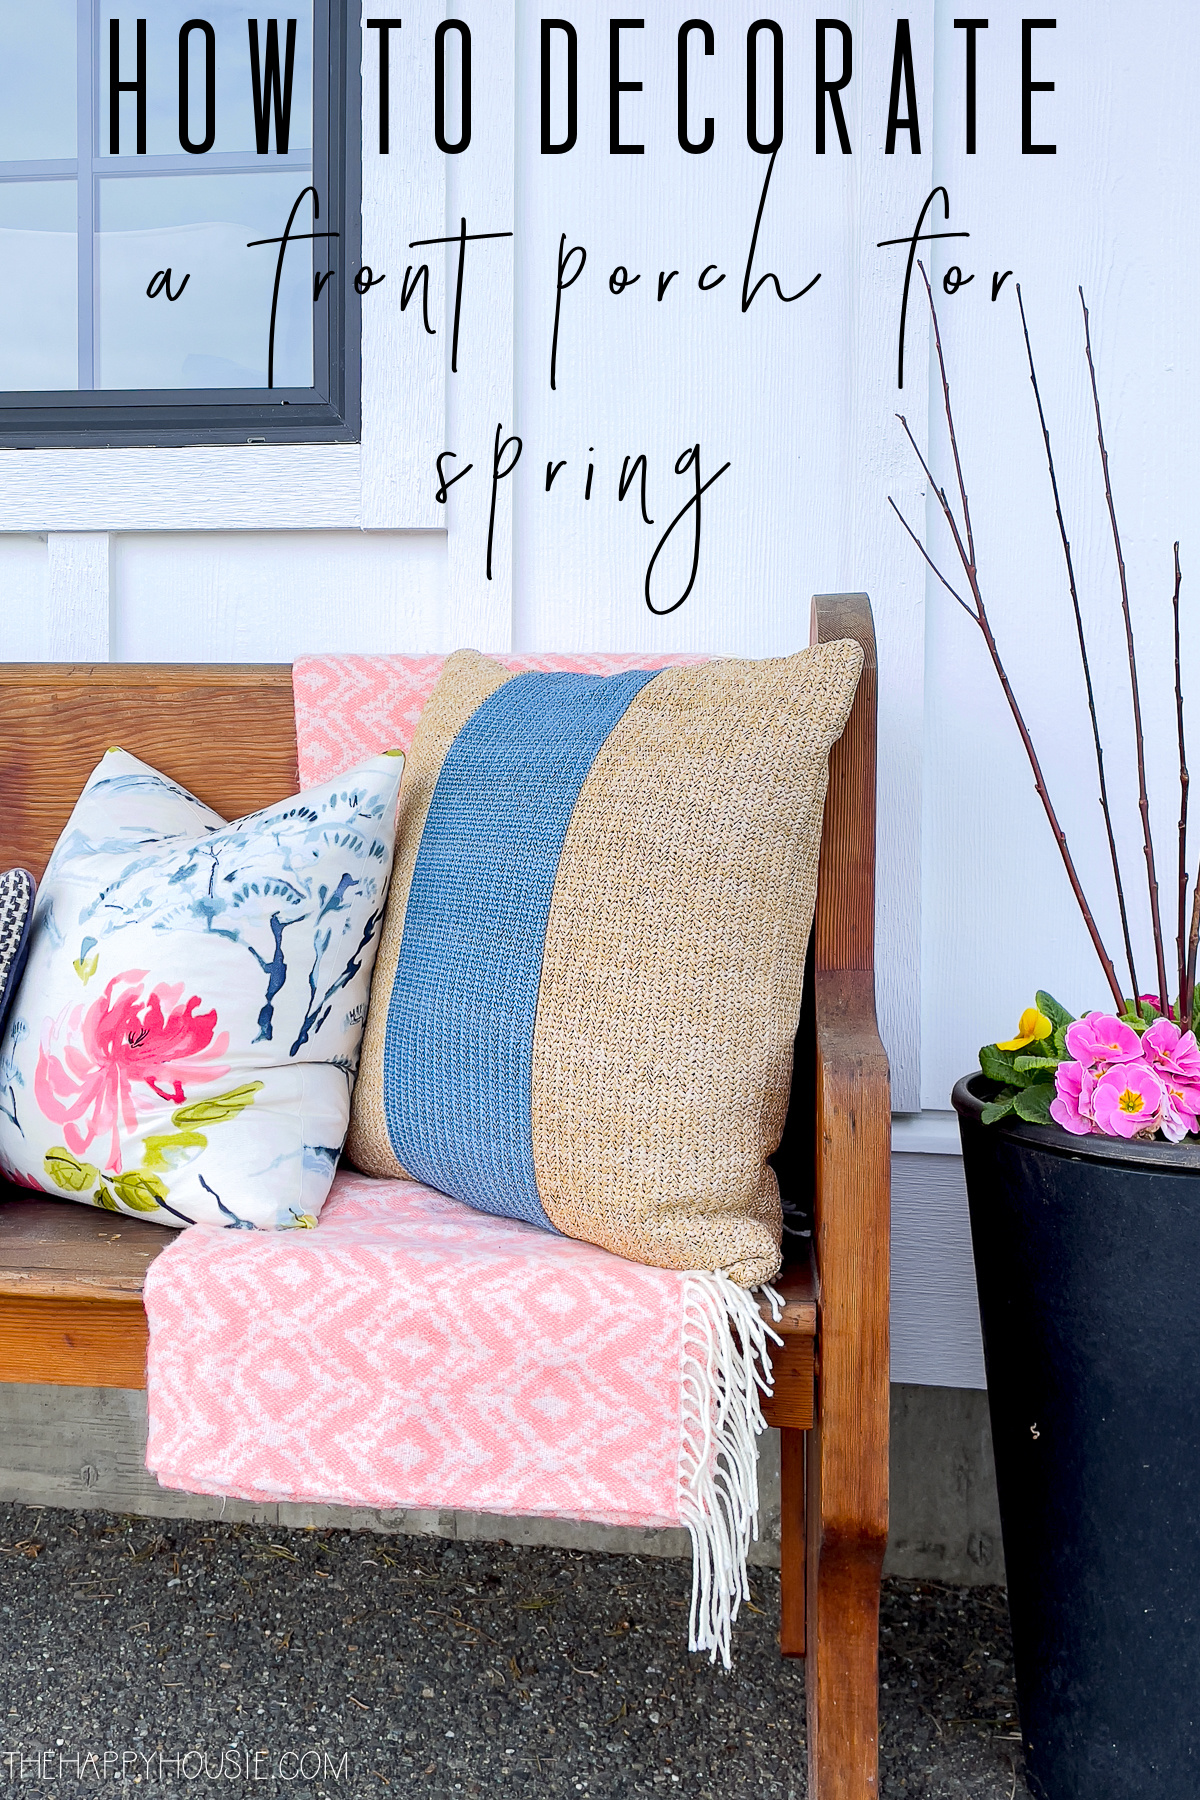 https://www.thehappyhousie.com/wp-content/uploads/2022/04/how-to-decorate-a-front-porch-for-spring.jpg